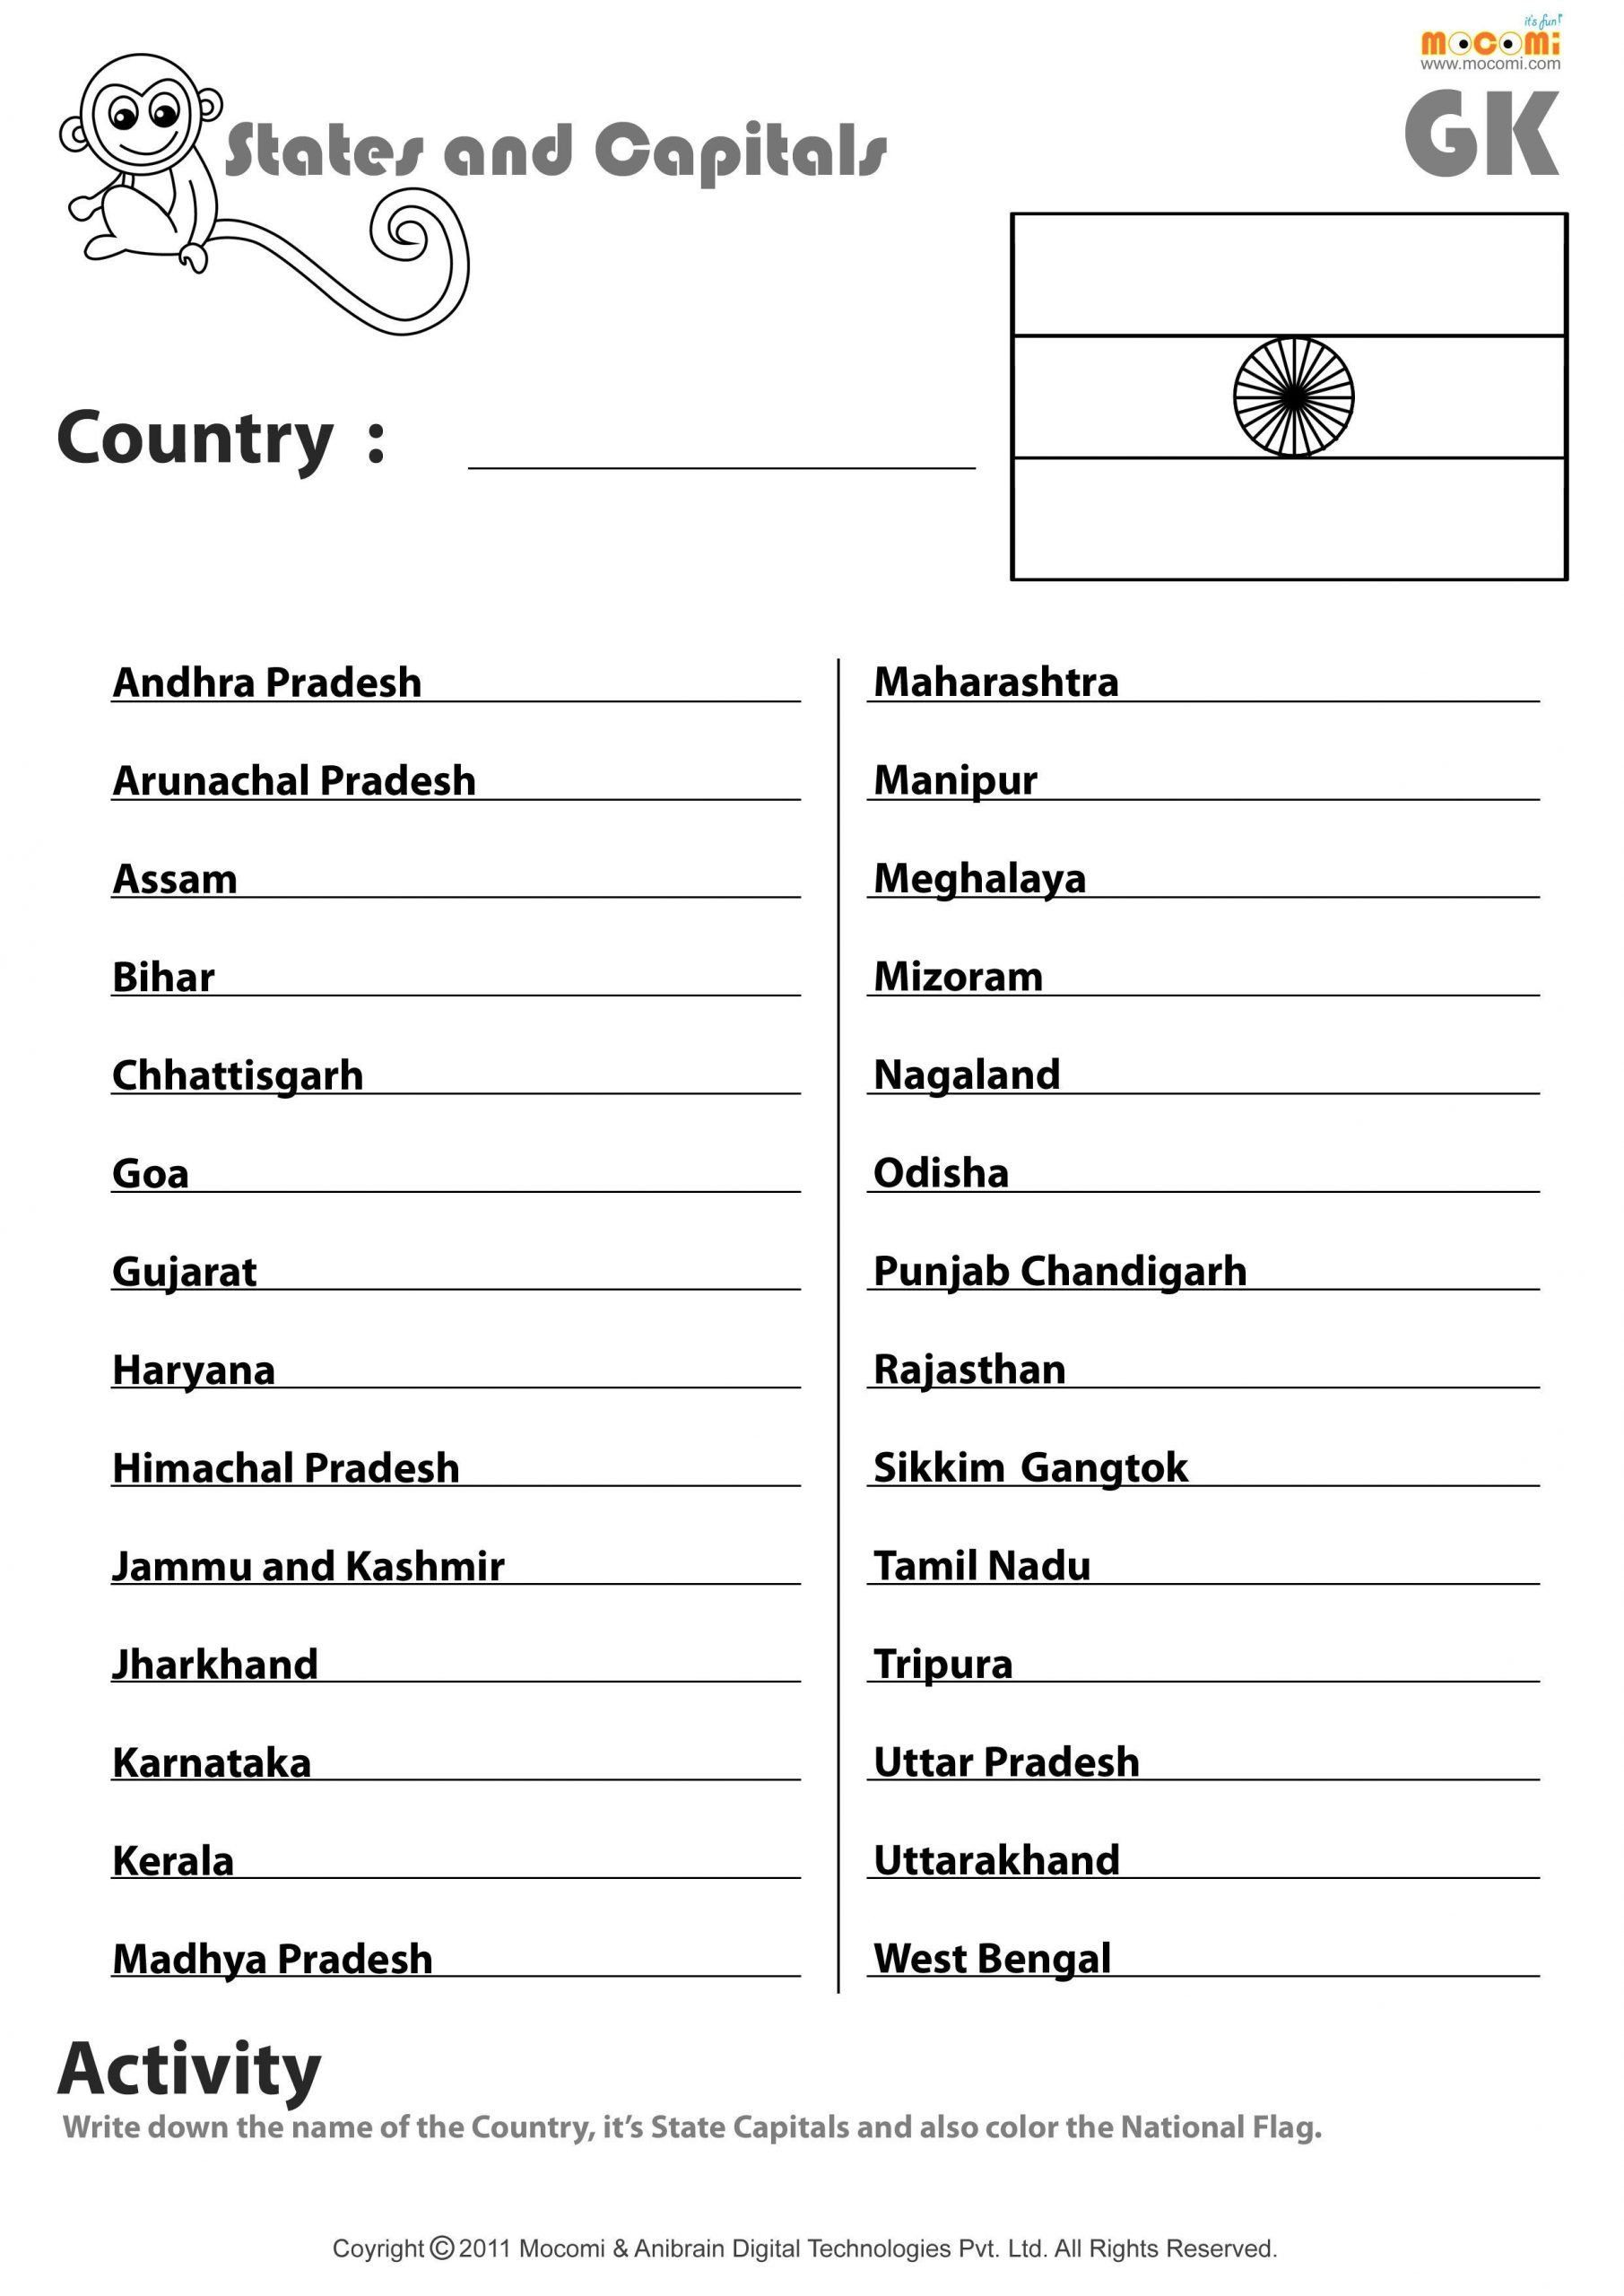 States and Capitals Matching Worksheet States and Capitals Matching Worksheet Indian States and